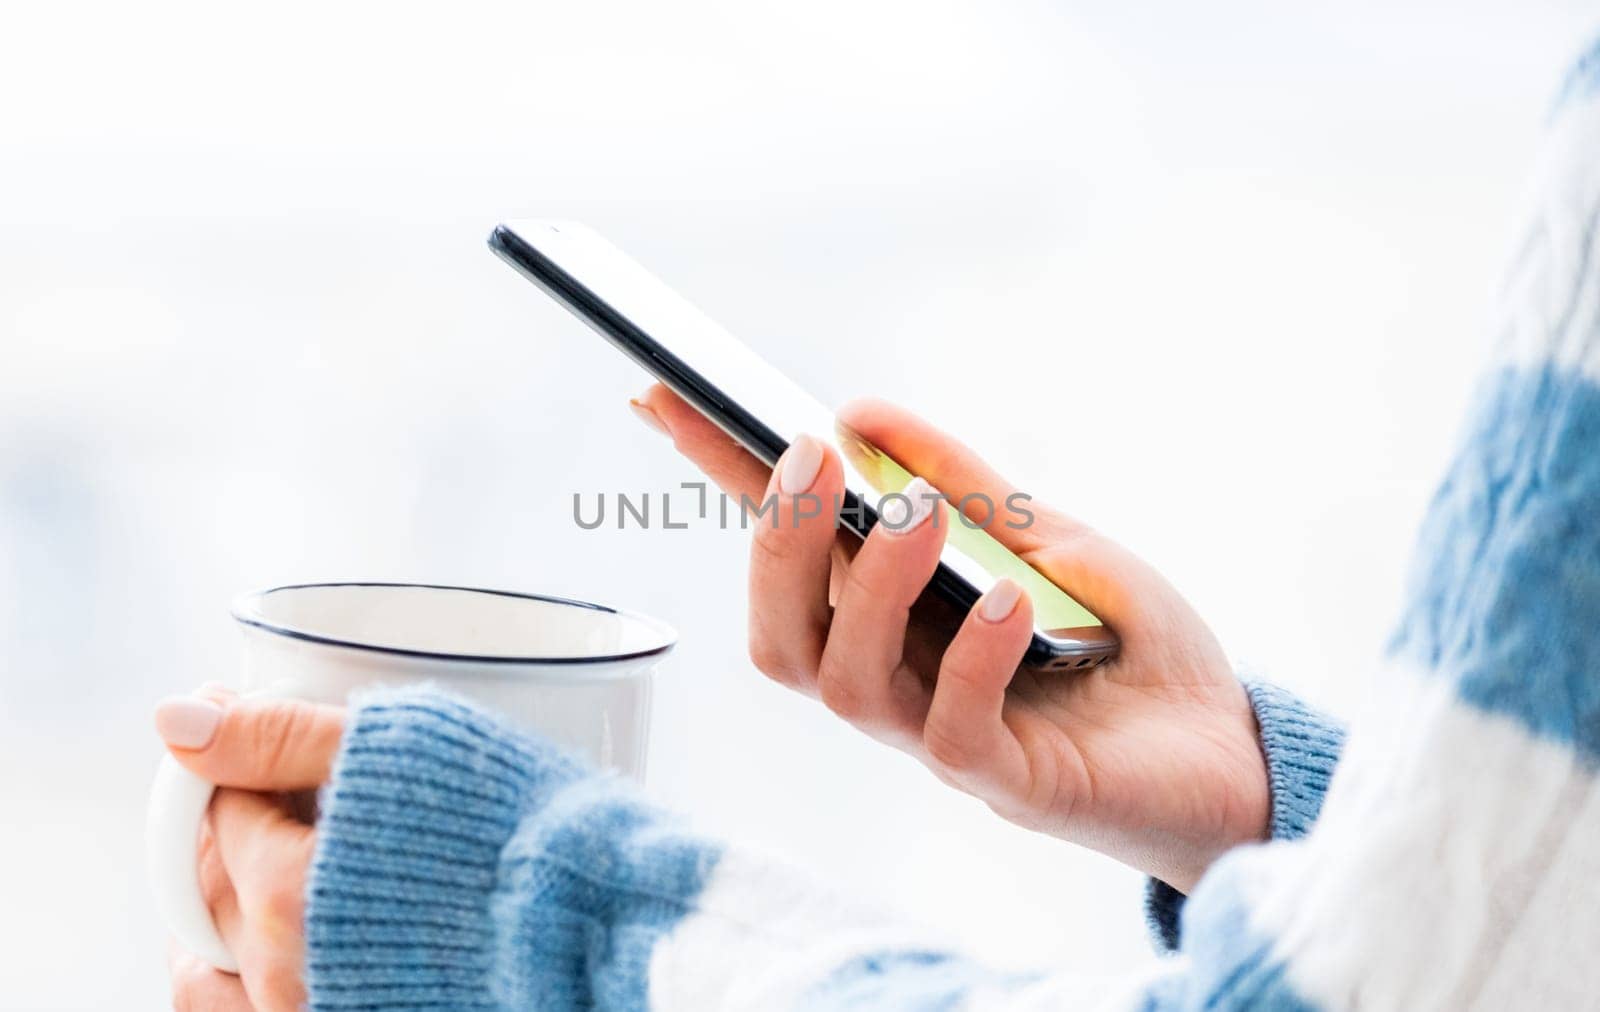 Hands holding cup and phone by GekaSkr